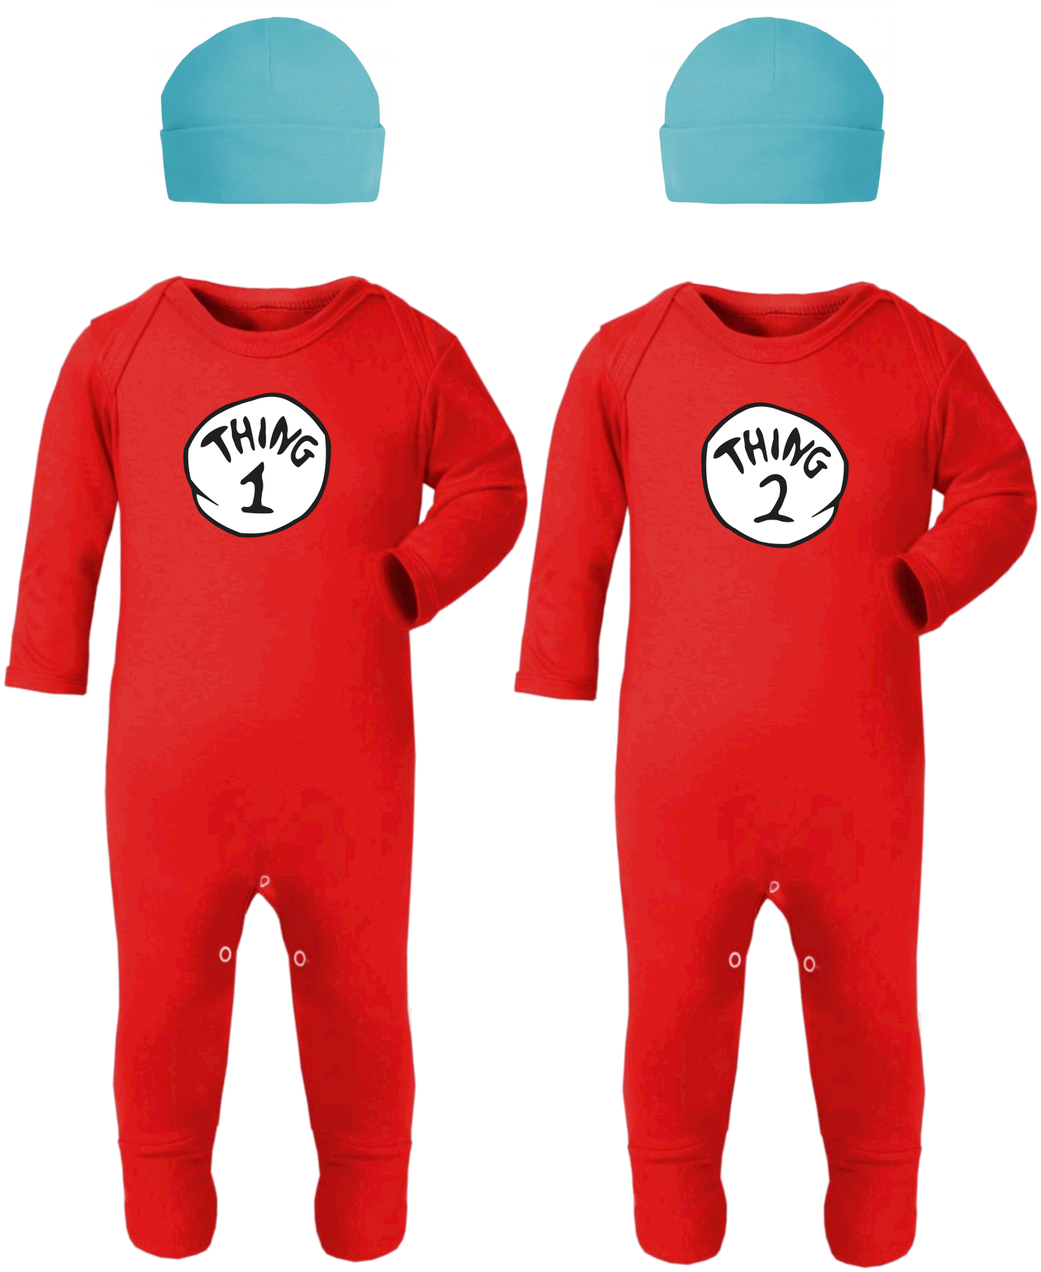 A Pair Of Red Baby Onesies